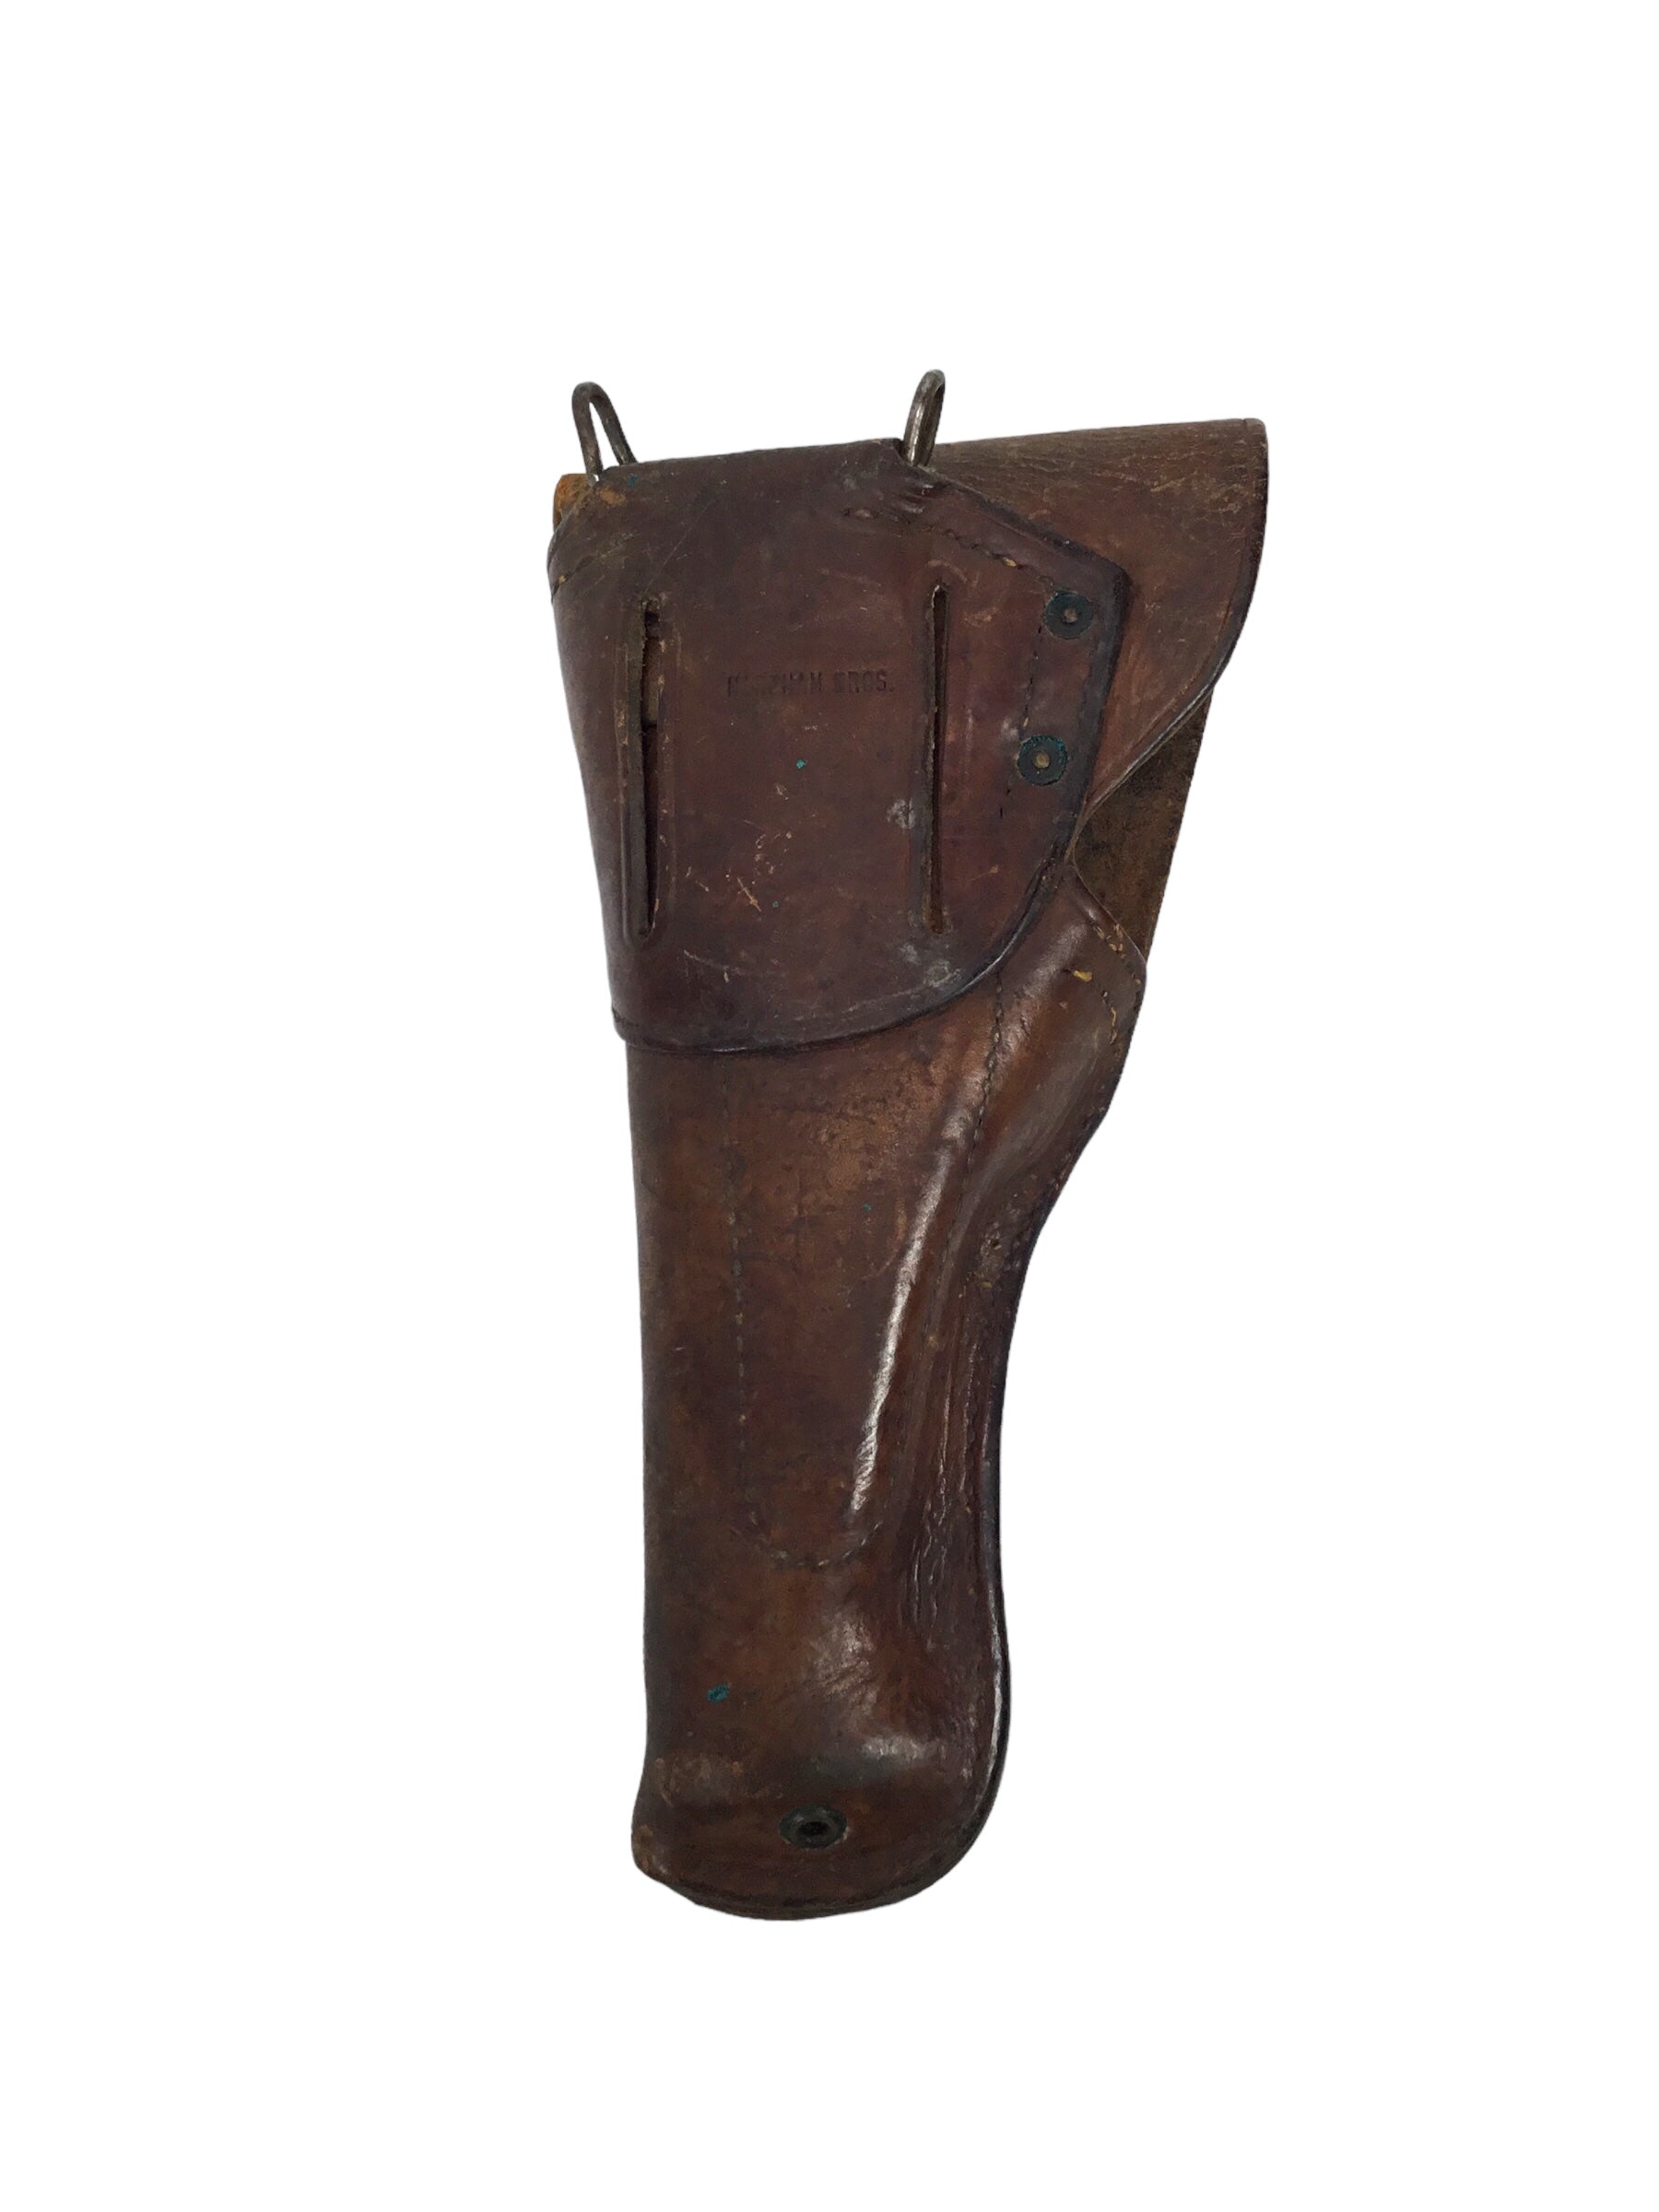 U.S. 1911 Leather Pistol Holster marked "U.S." on flap, further marked "Harpham Bros."